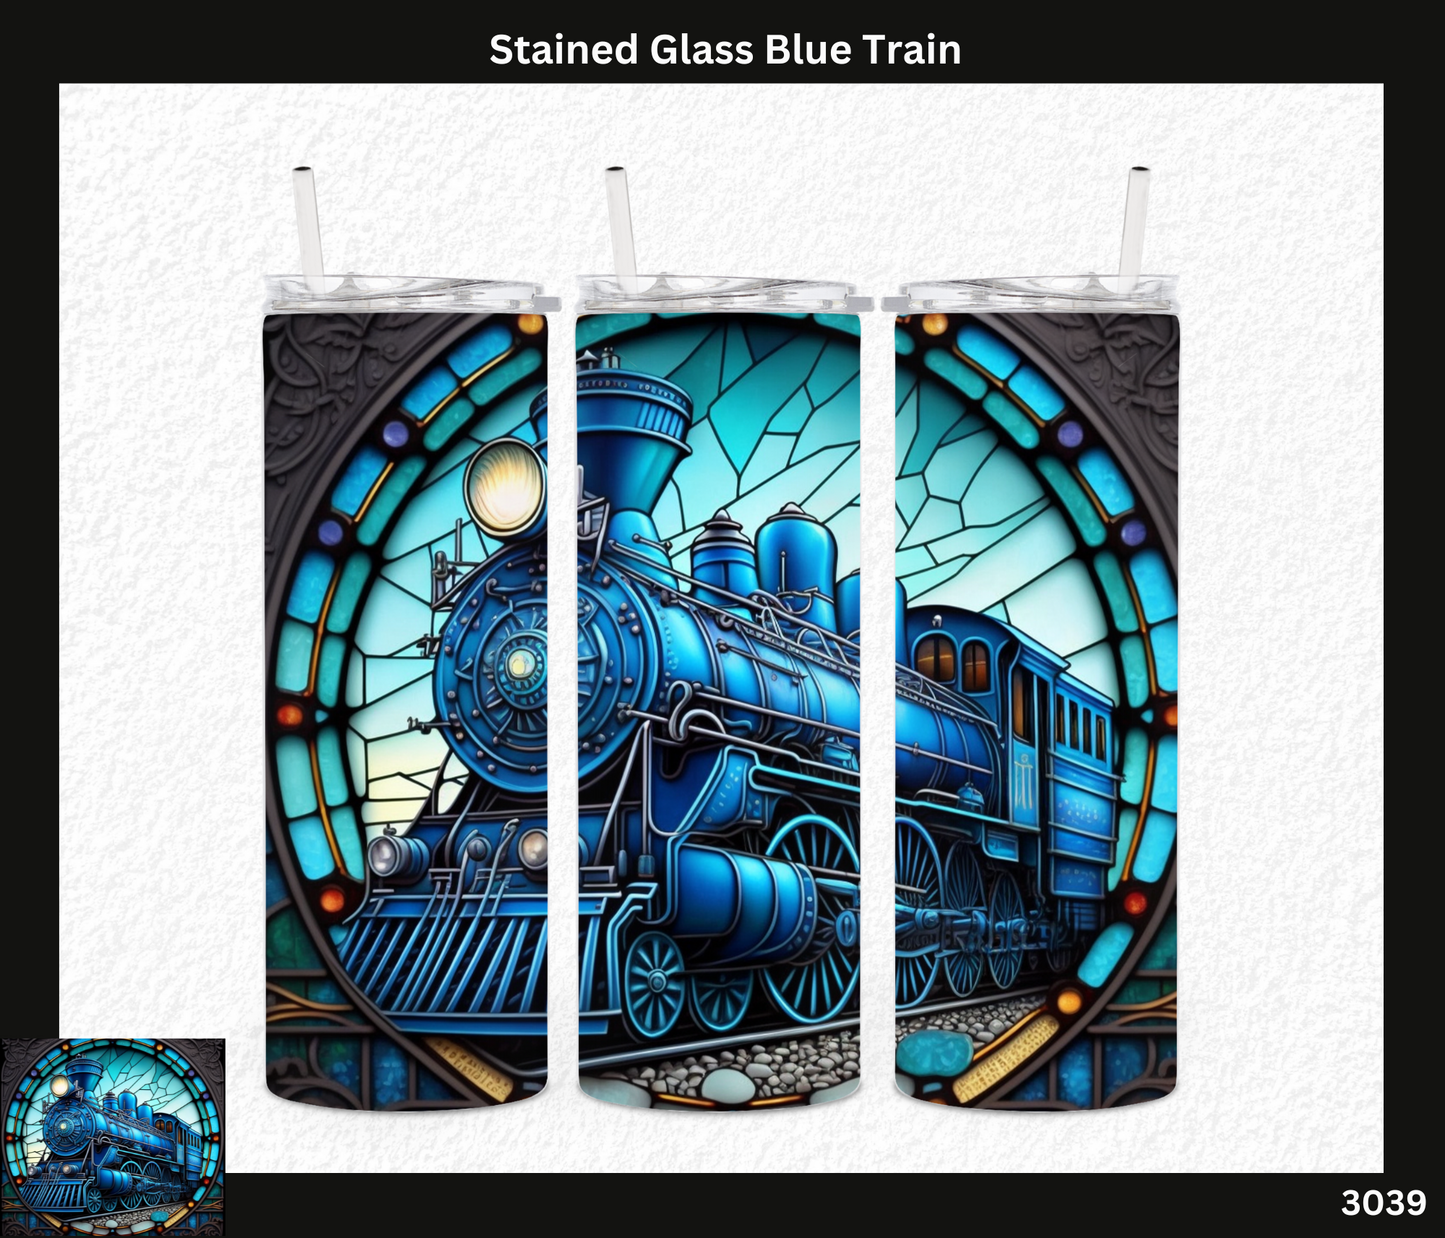 Stained Glass Blue Train